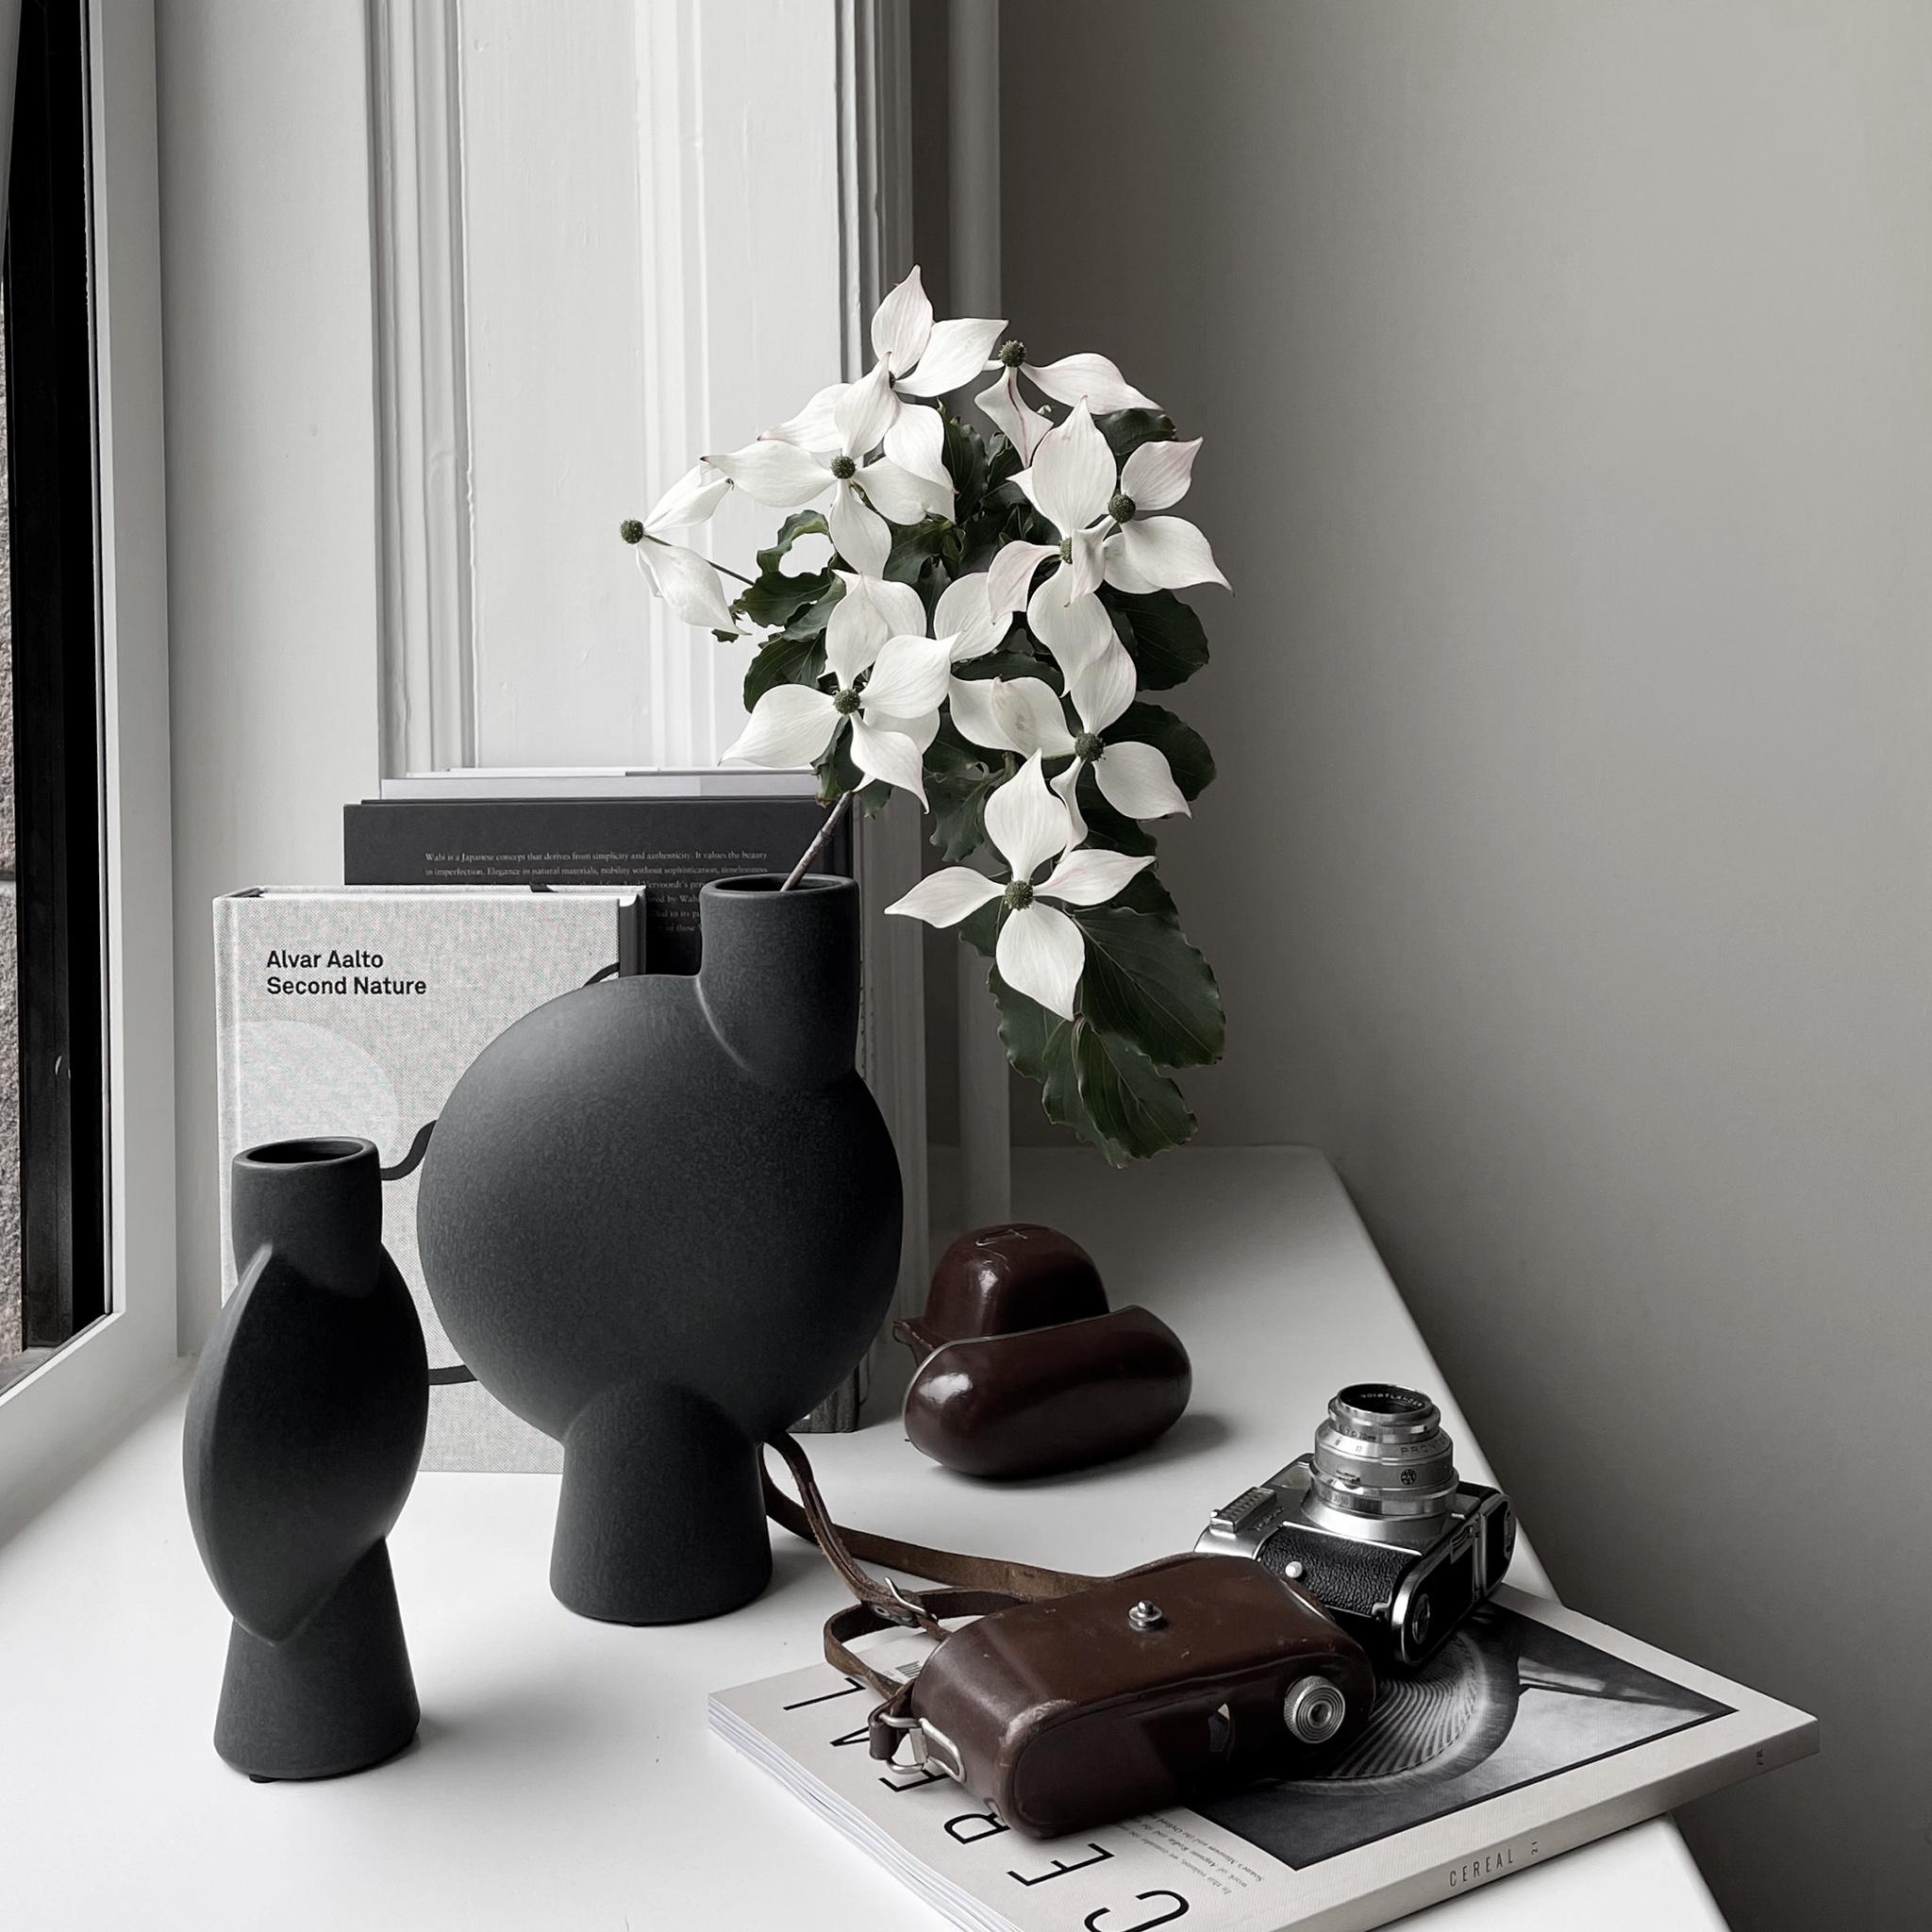 A set of 4 black medio sphere vase bubl by 101 Copenhagen
Designed by Kristian Sofus Hansen & Tommy Hyldahl
Dimensions: L18 / W8 / H26 CM
Materials: Ceramic

The Sphere collection celebrates unique silhouettes and textures that makes an impact